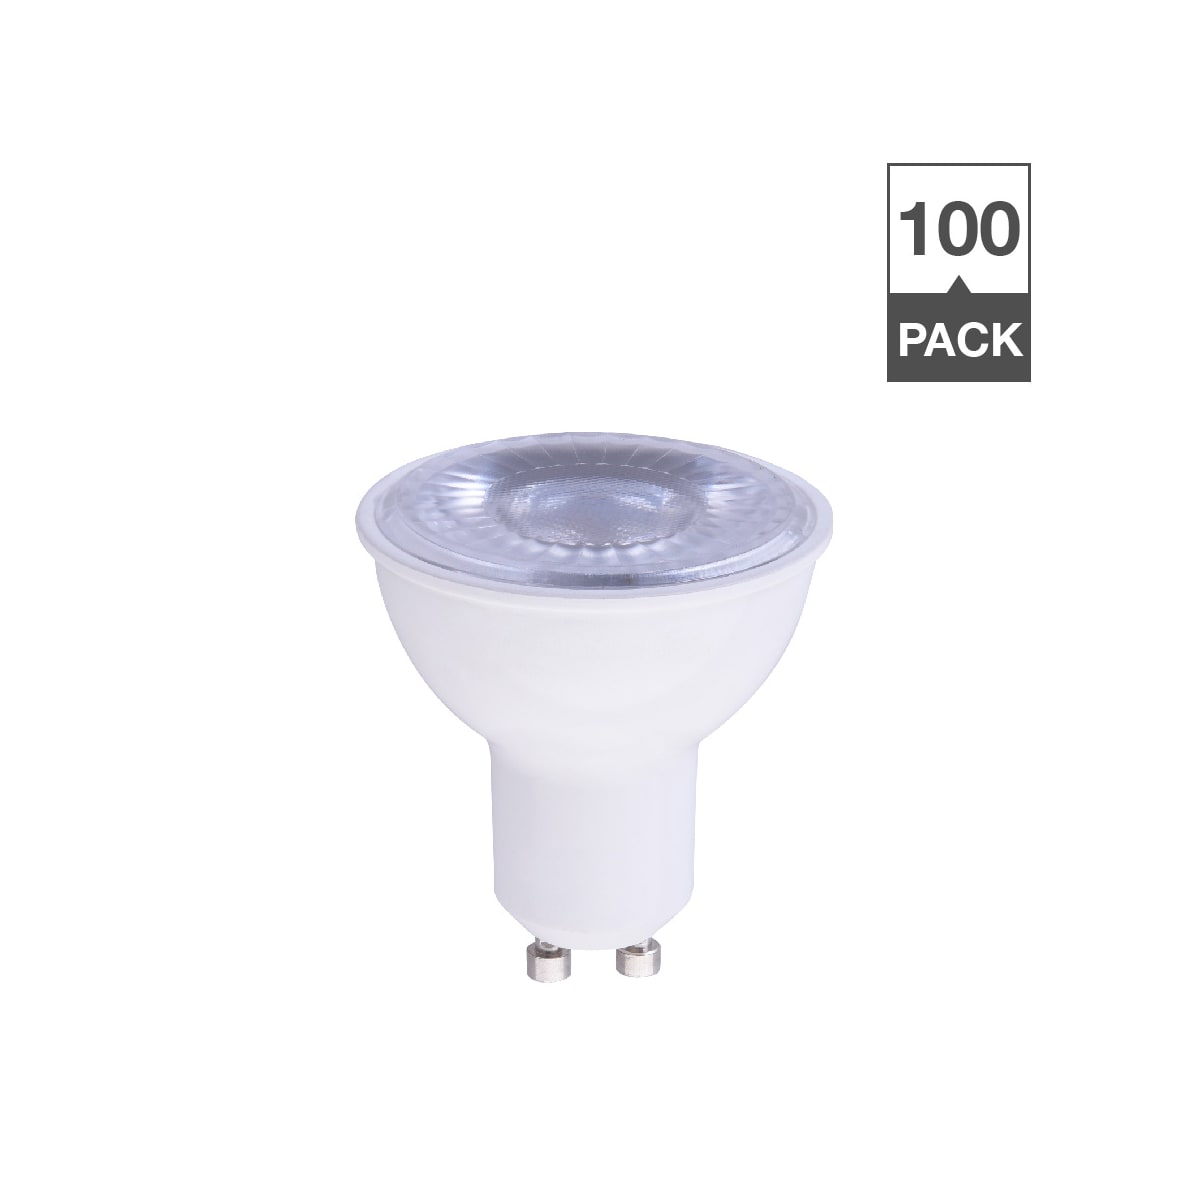 Berettigelse mild Indeholde Simply Conserve L07MR16GU10-27K N/A Pack of (100) 7 Watt Soft White  Dimmable MR16 GU10 LED Bulbs - FaucetDirect.com